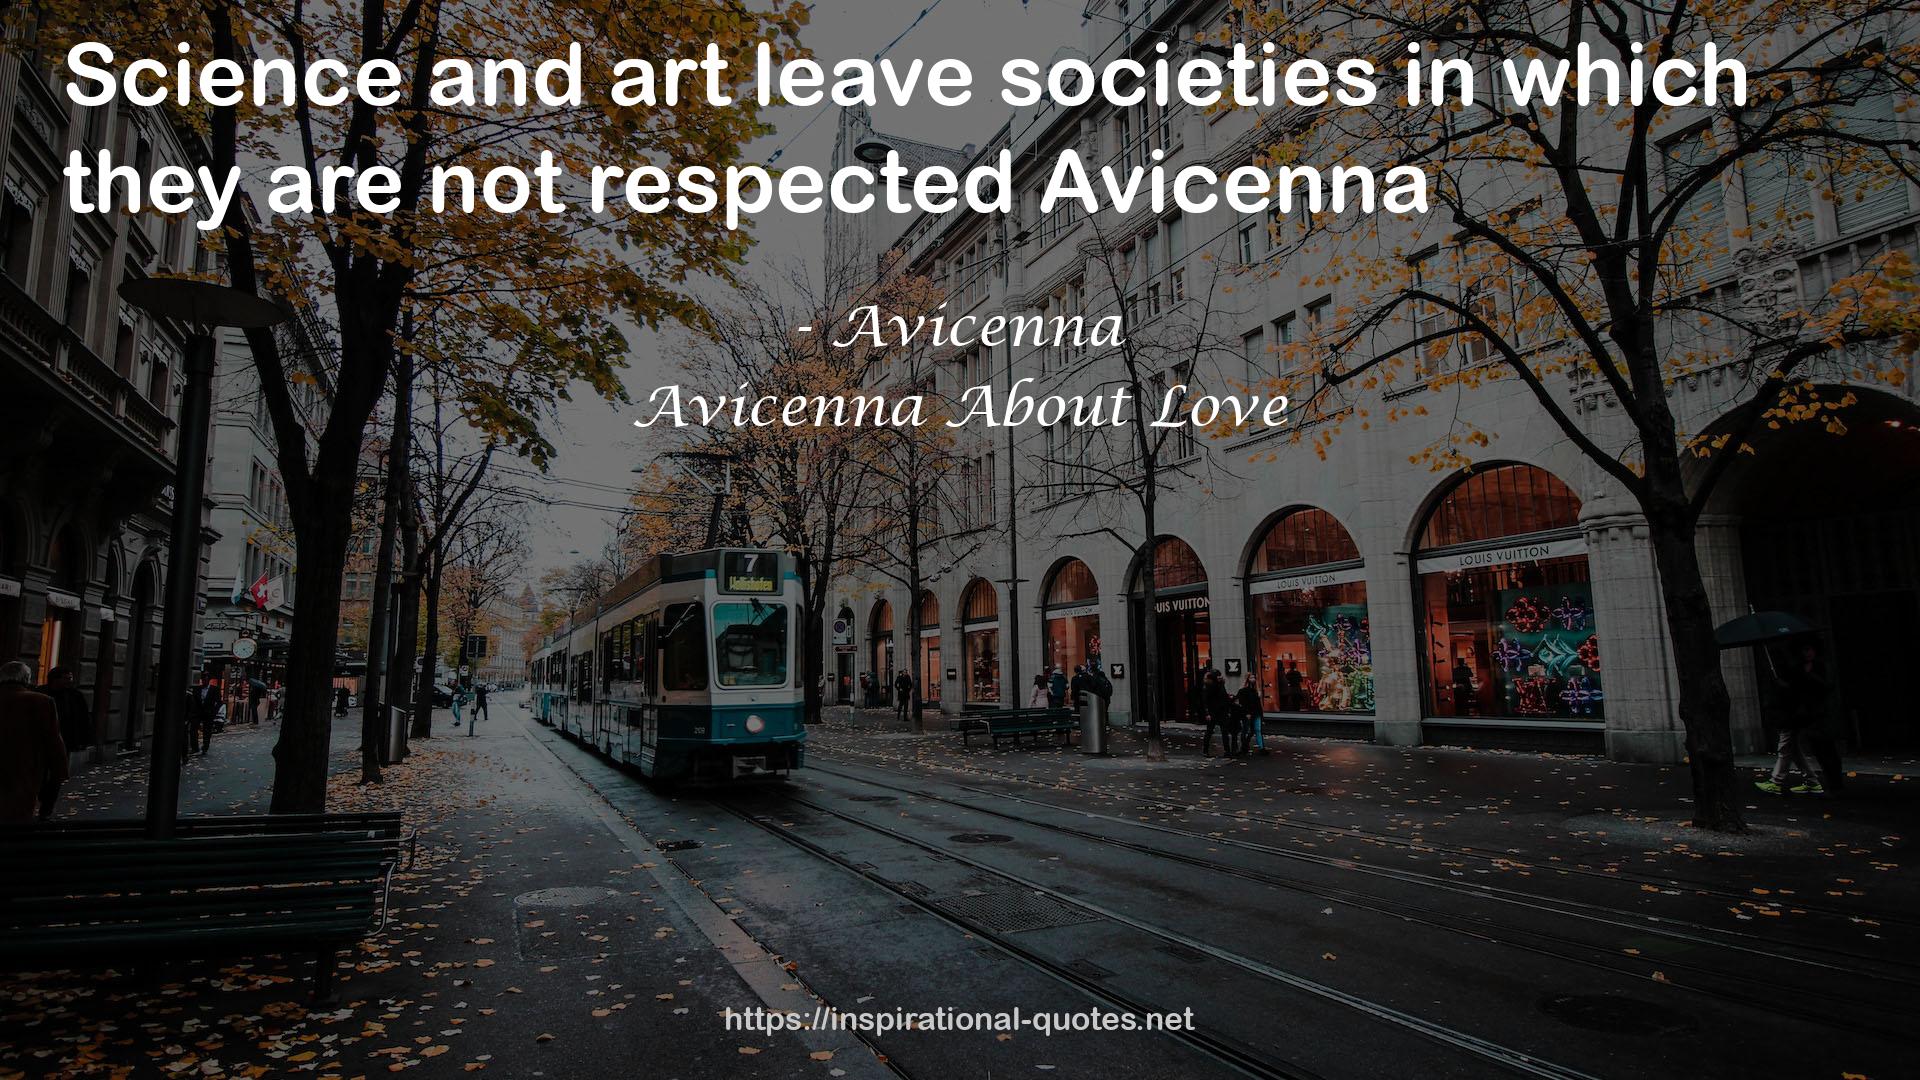 Avicenna About Love QUOTES